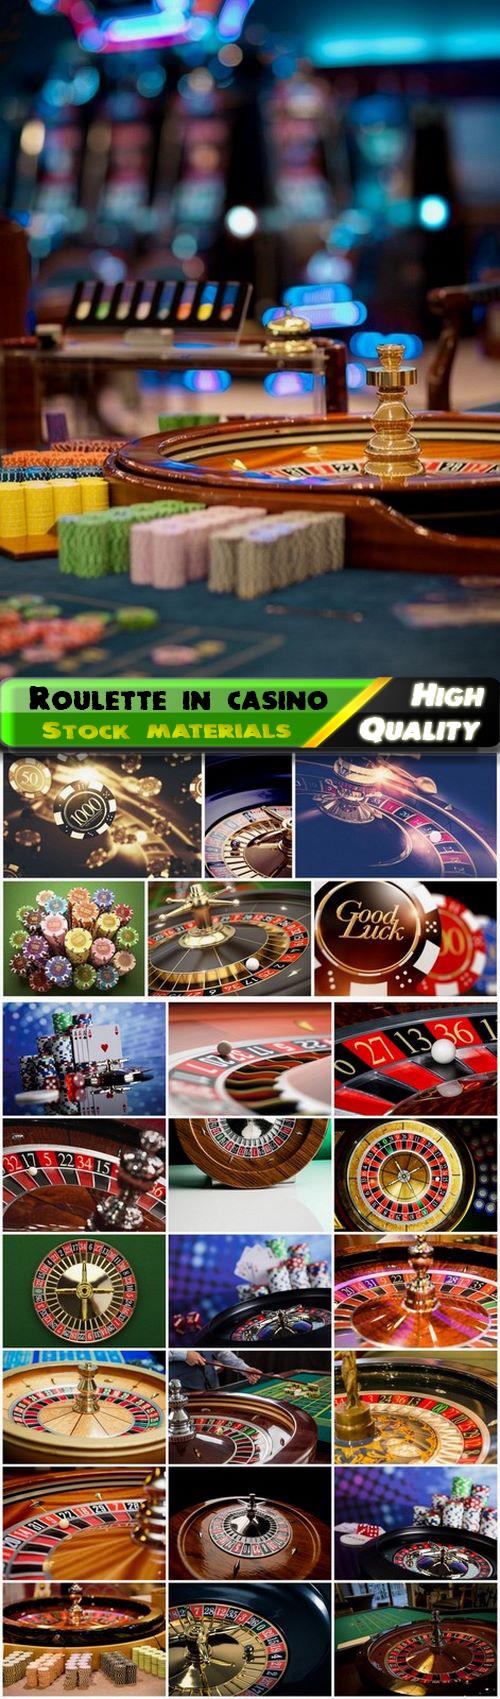 Games of chance at roulette in casino 25 HQ Jpg